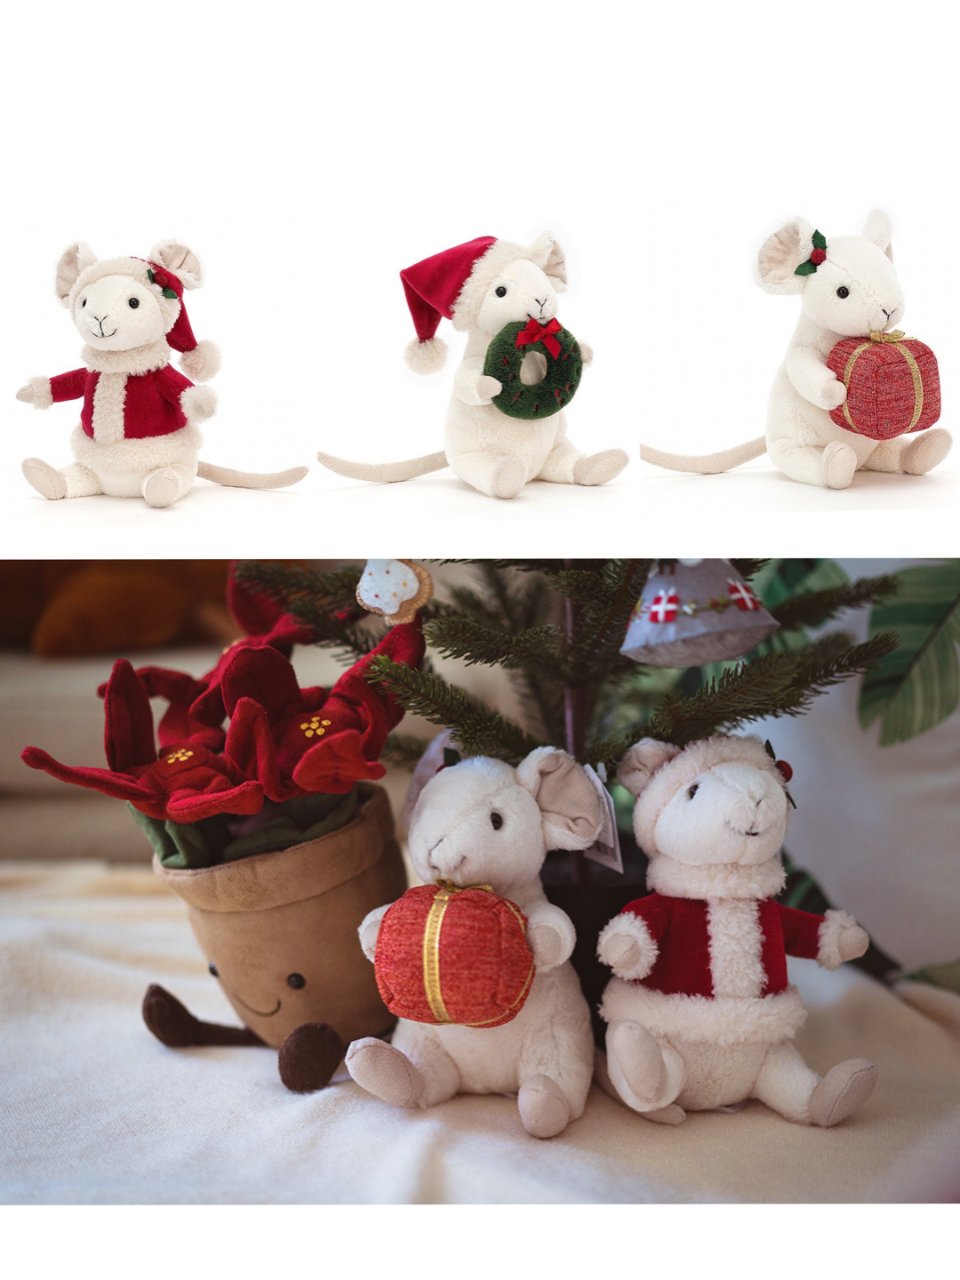 Buy Merry Mouse Wreath - Online at Jellycat.com